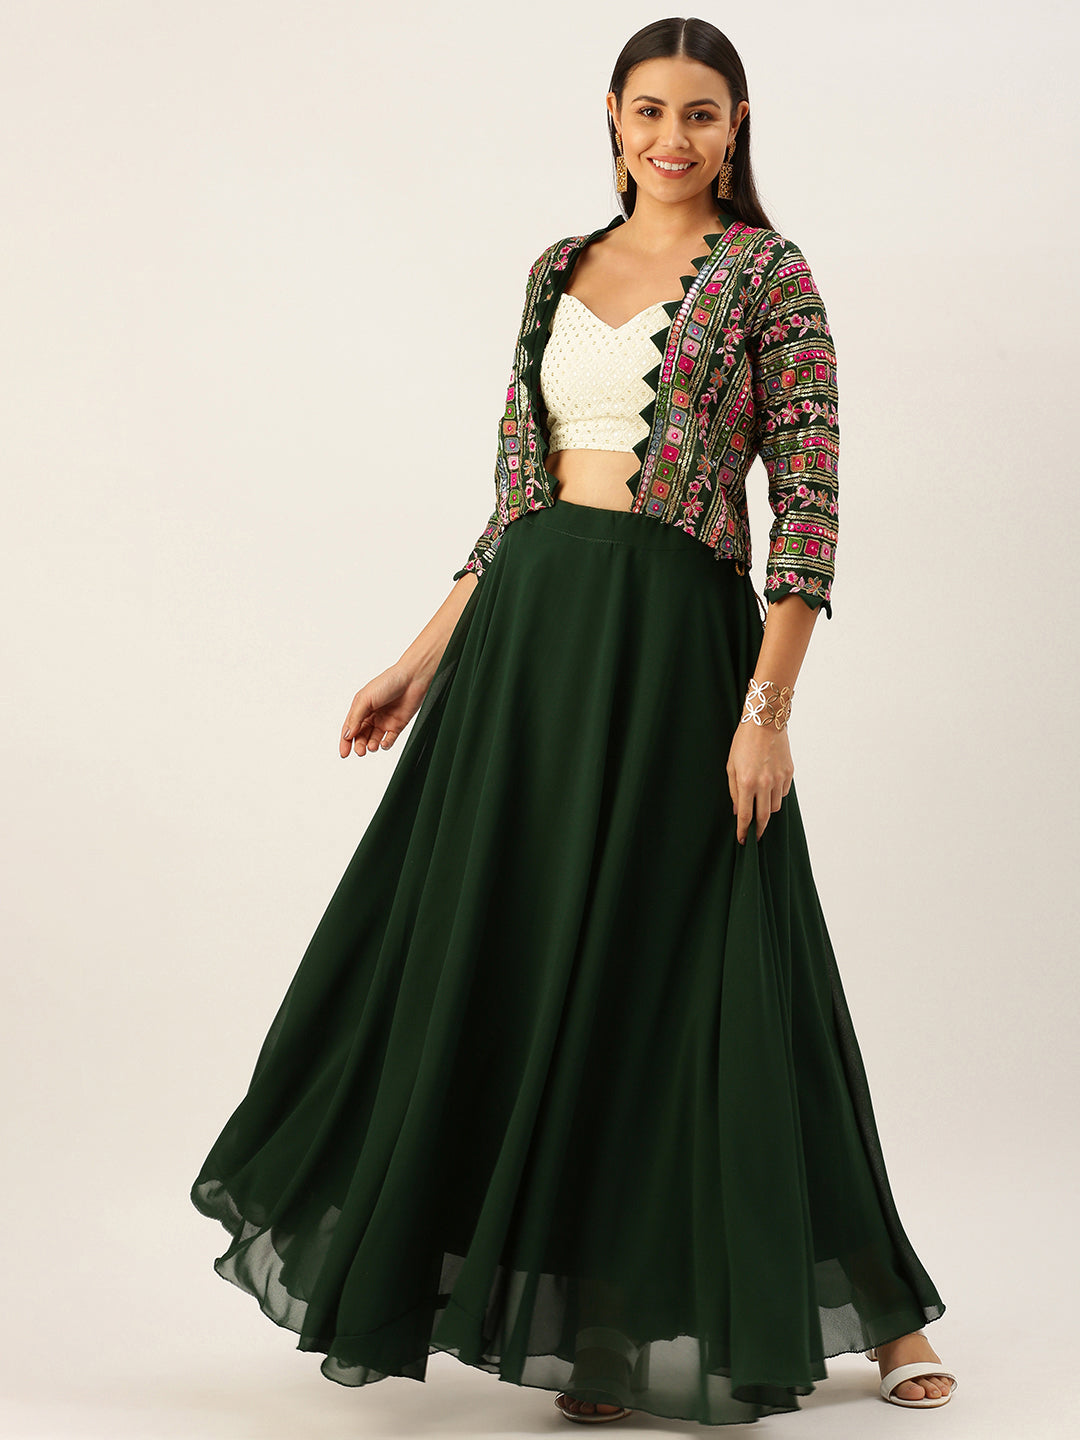 Green Color Georgette Lehenga Choli With Embroidery Work Kot